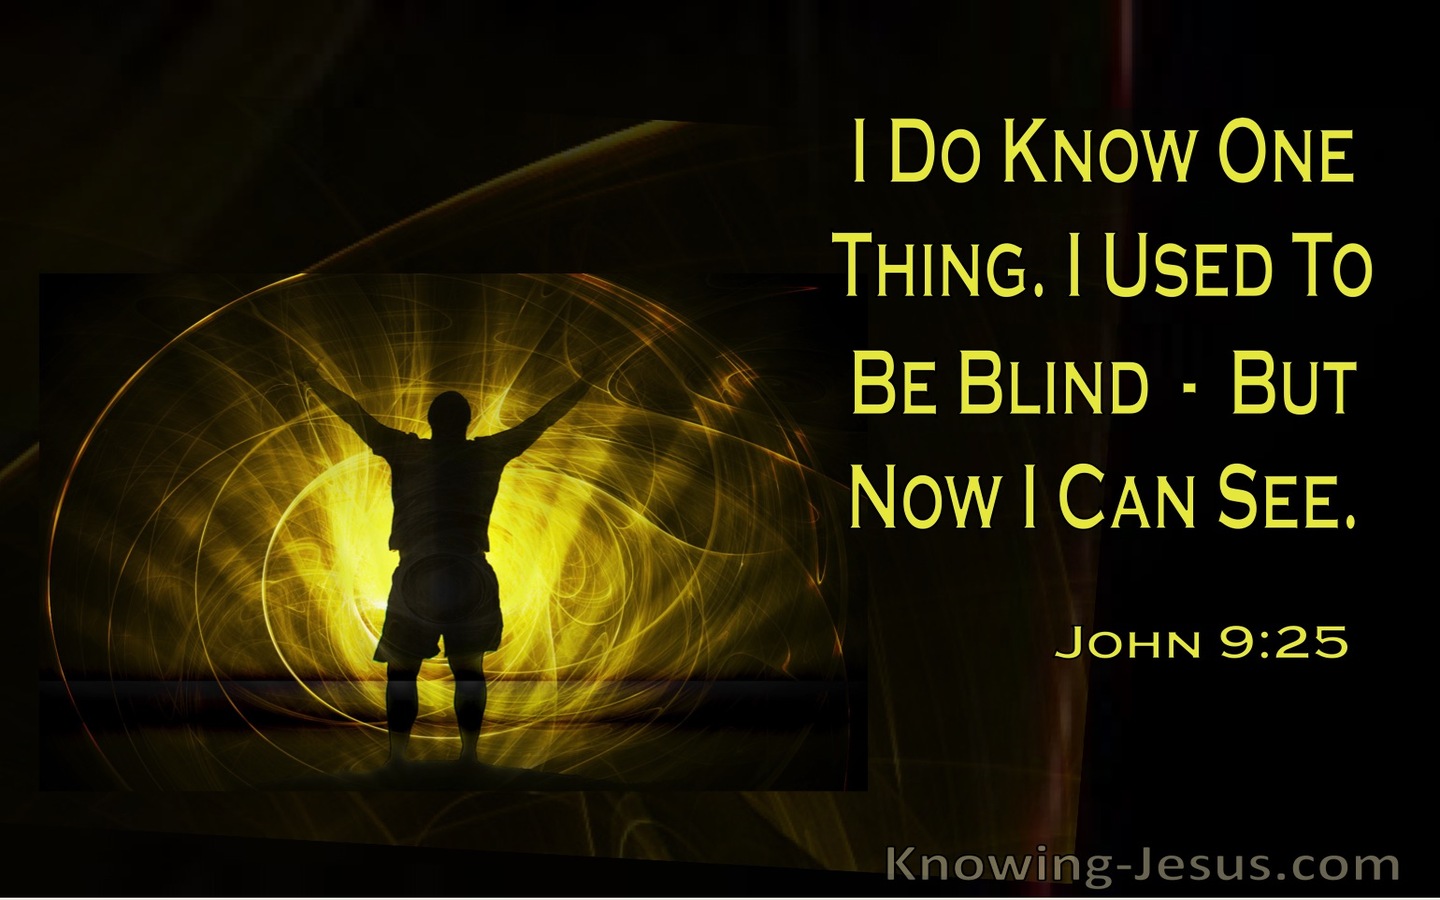 John 9:25 Once I Was Blind But Now I See (windows)07:09